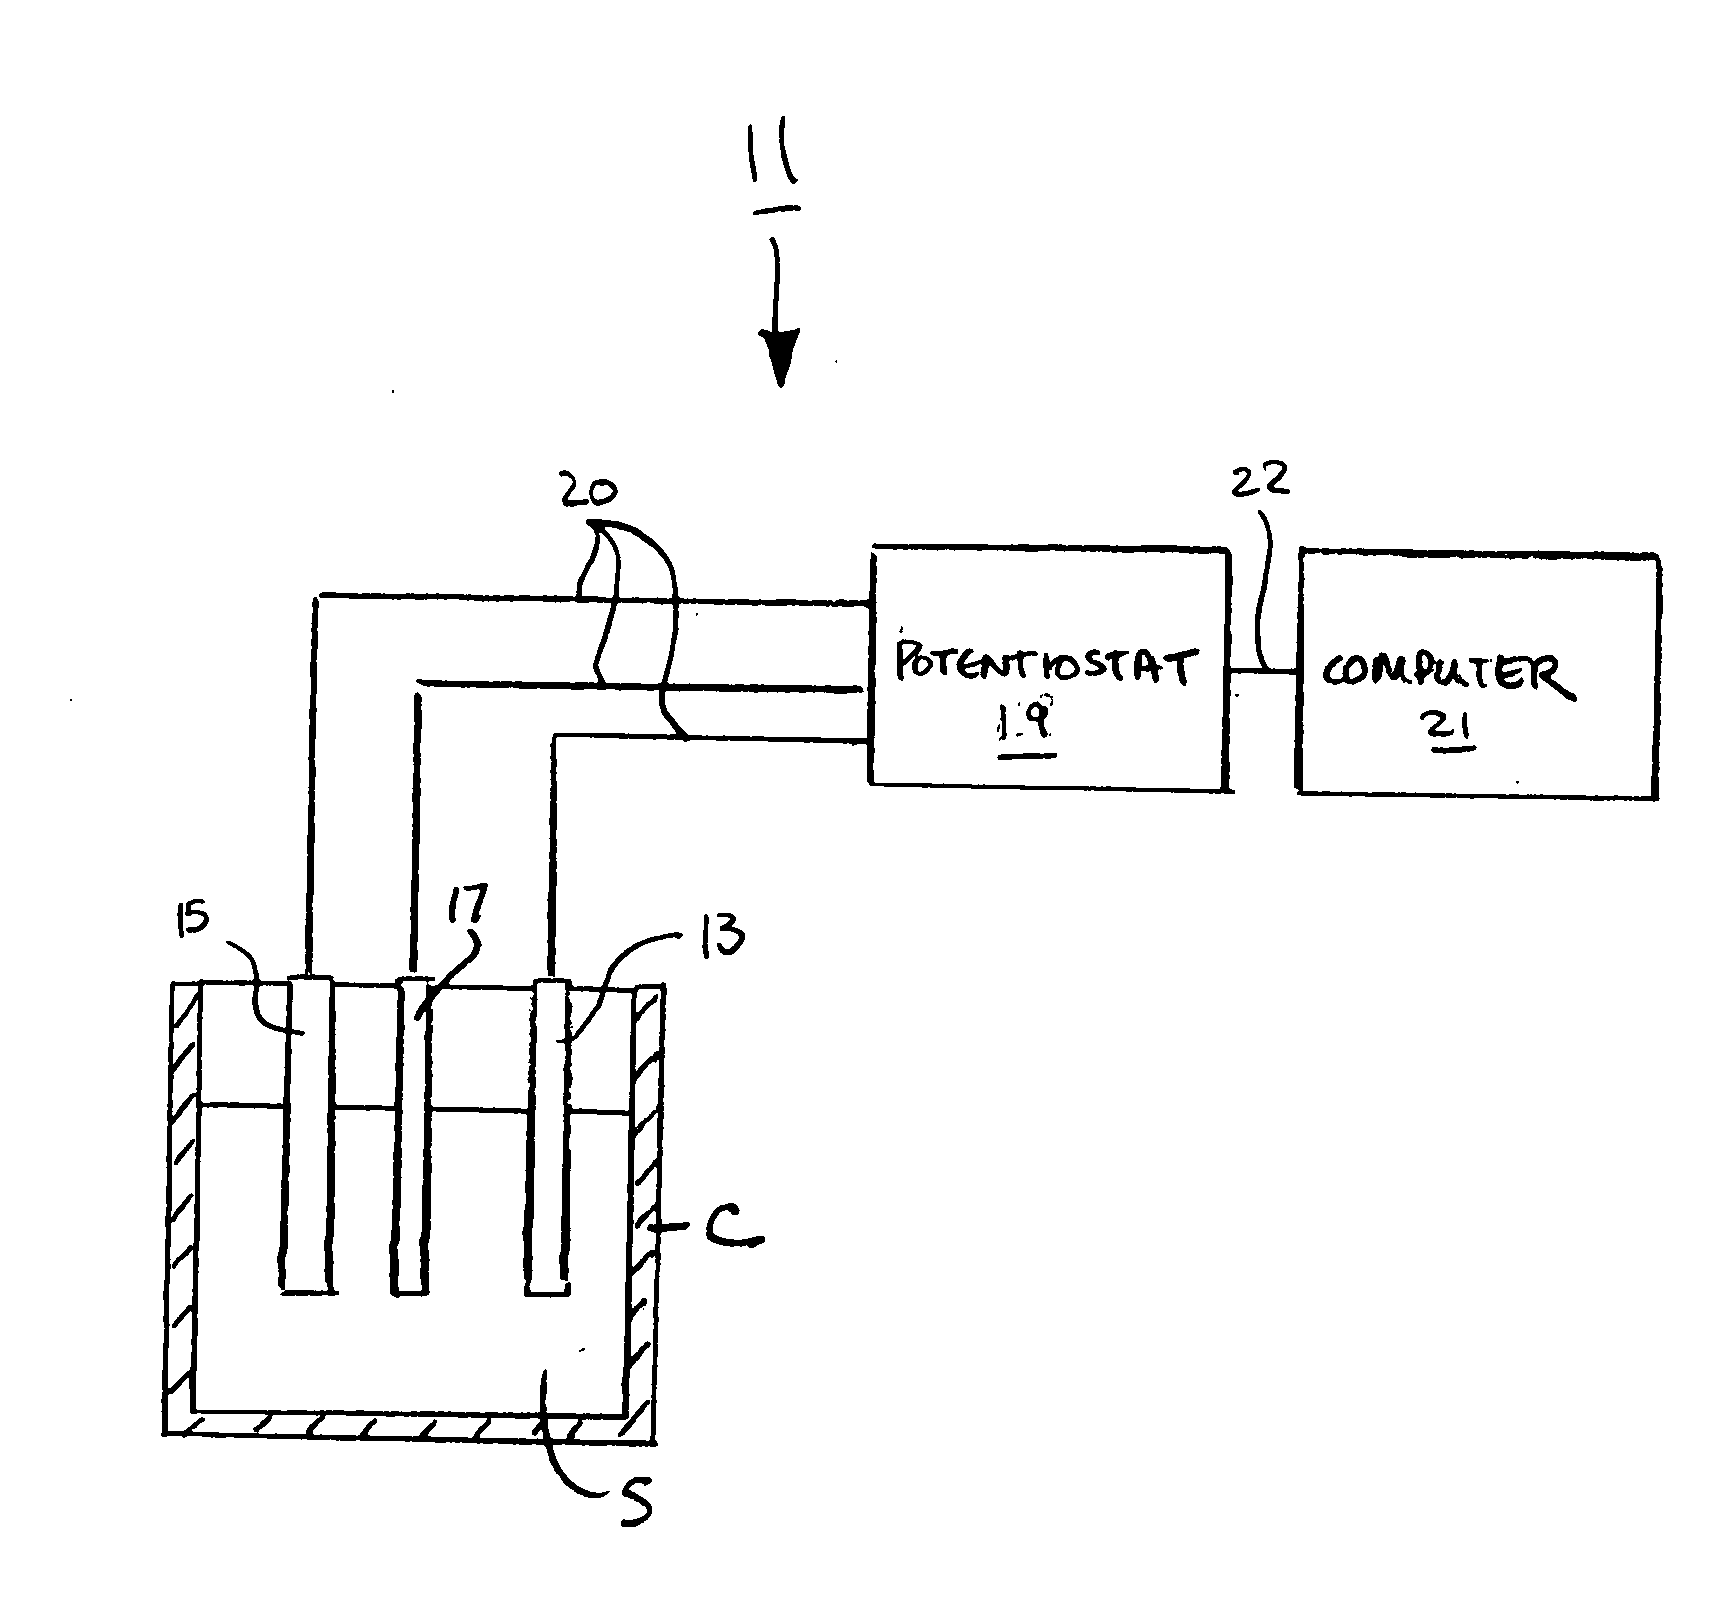 Method for detecting individual oxidant species and halide anions in a sample using differential pulse non-stripping voltammetry